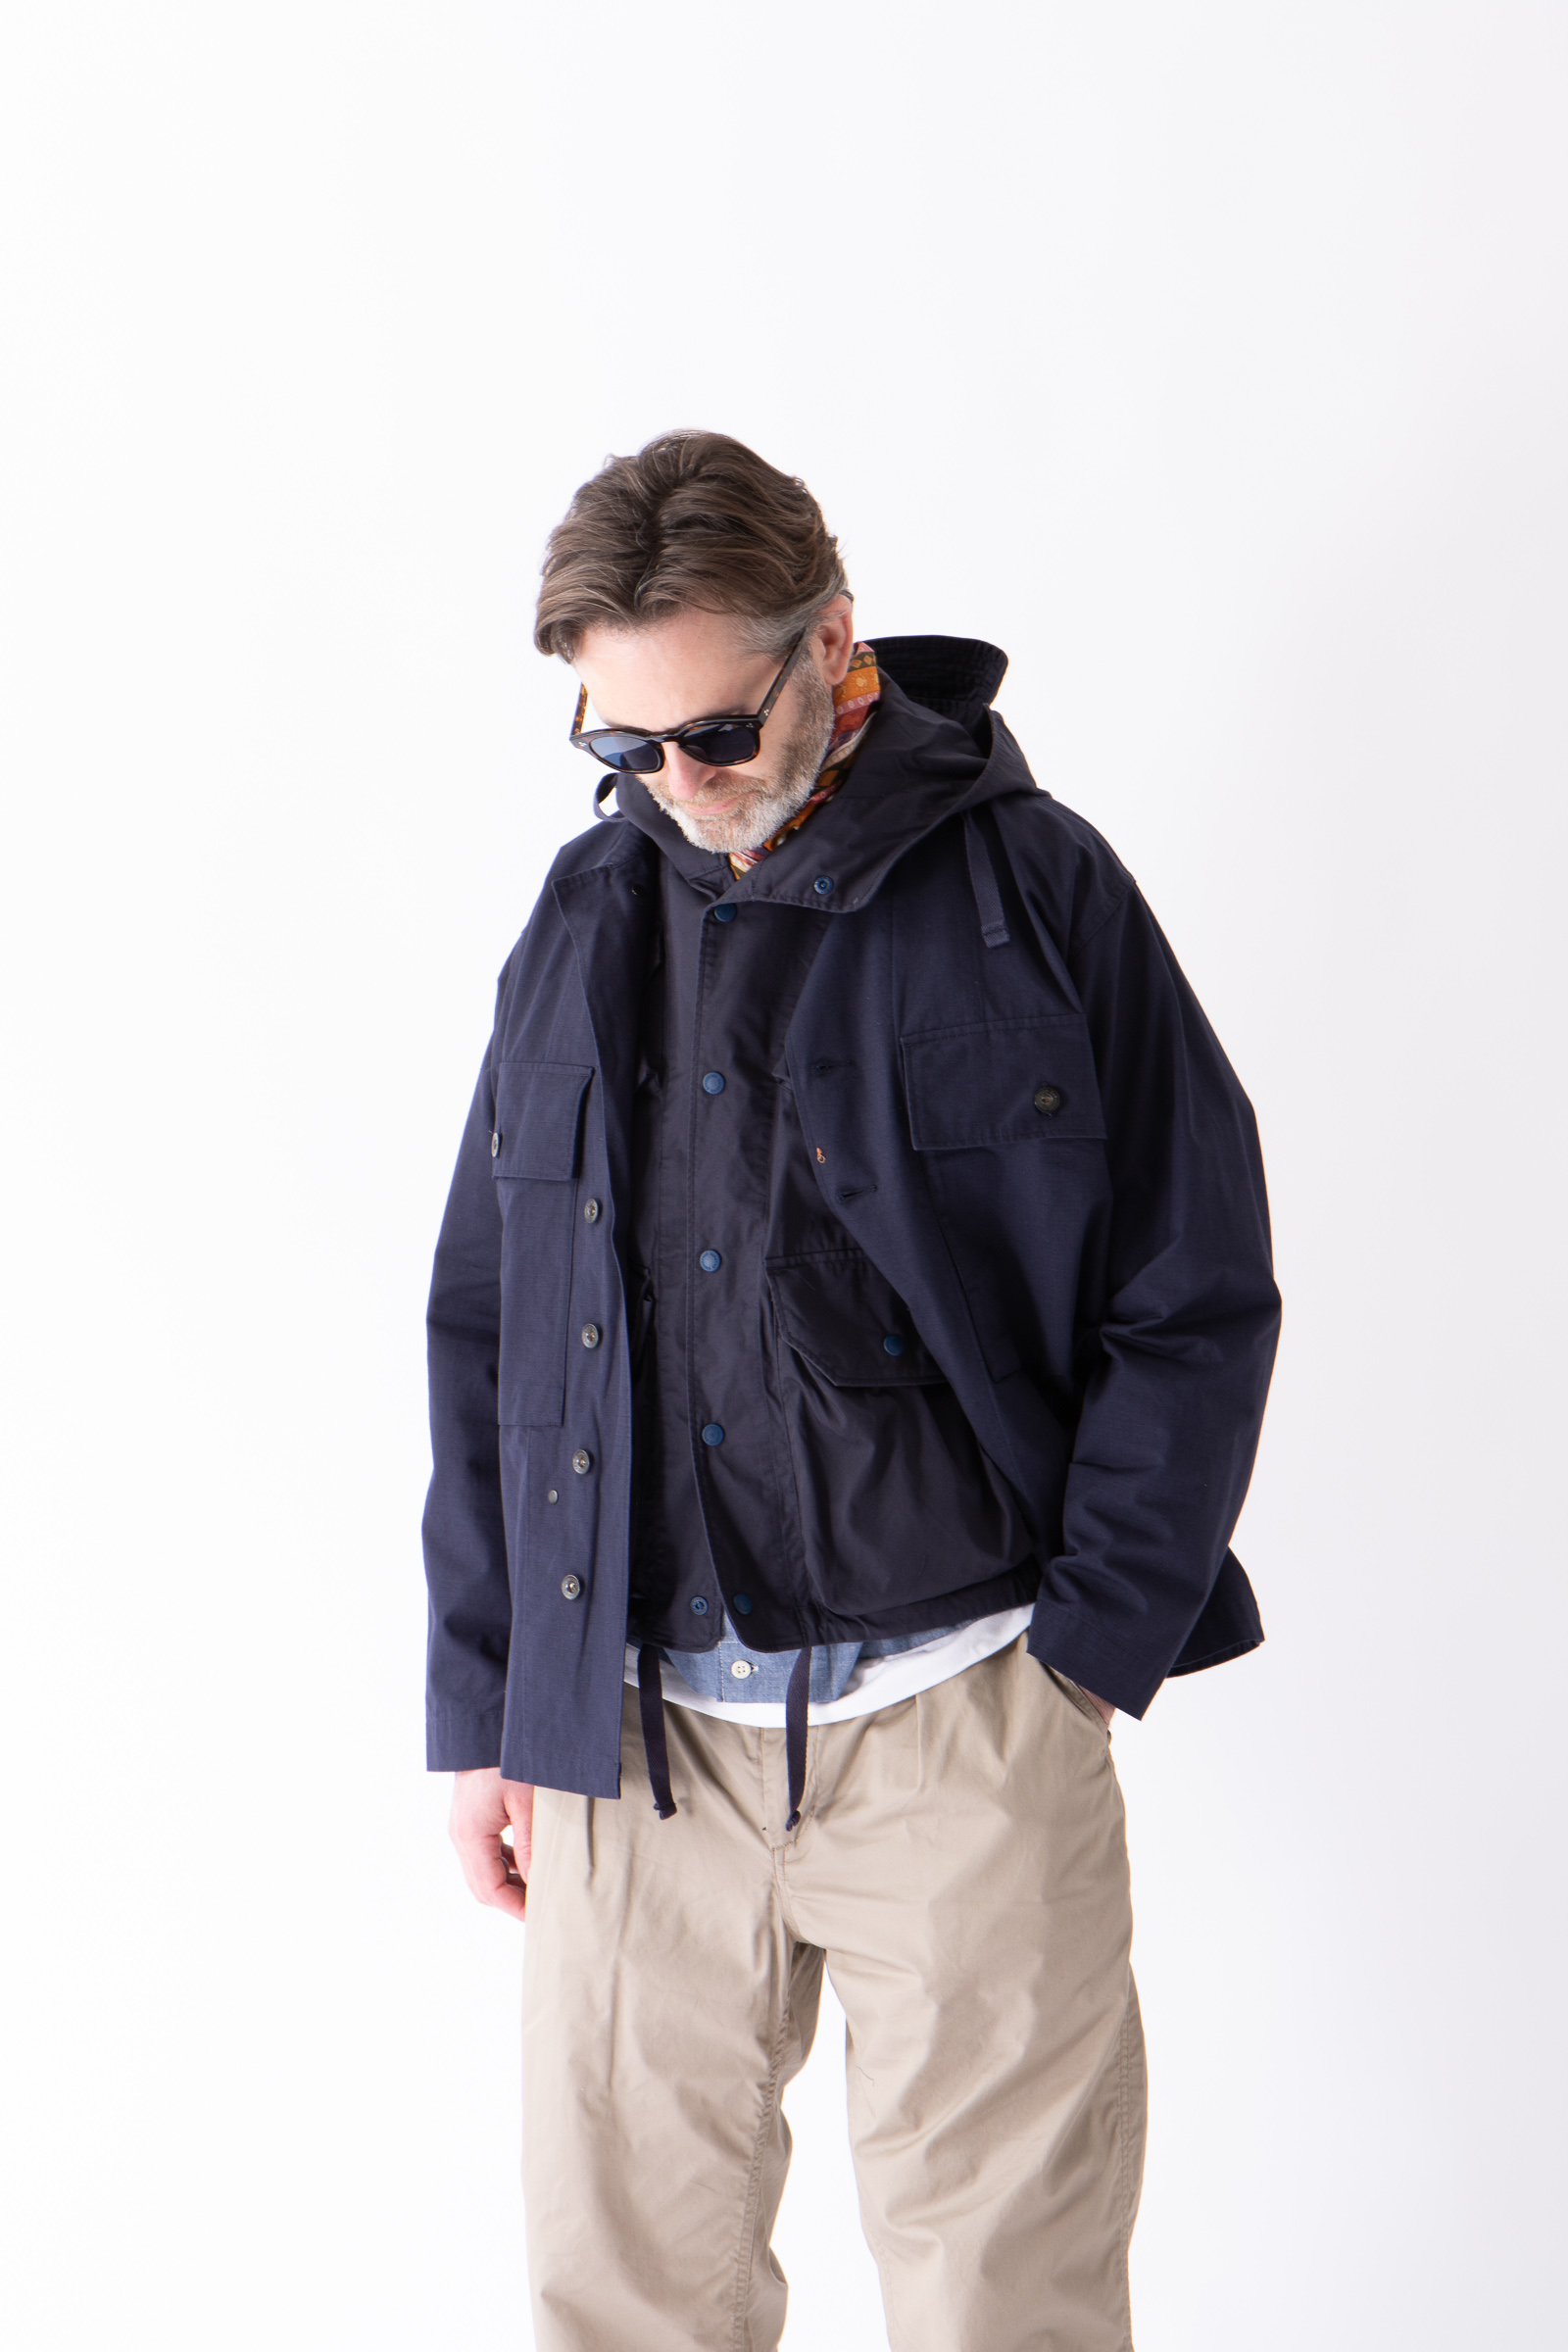 ENGINEERED GARMENTS SS21 DELIVERY 1 - The Bureau Belfast